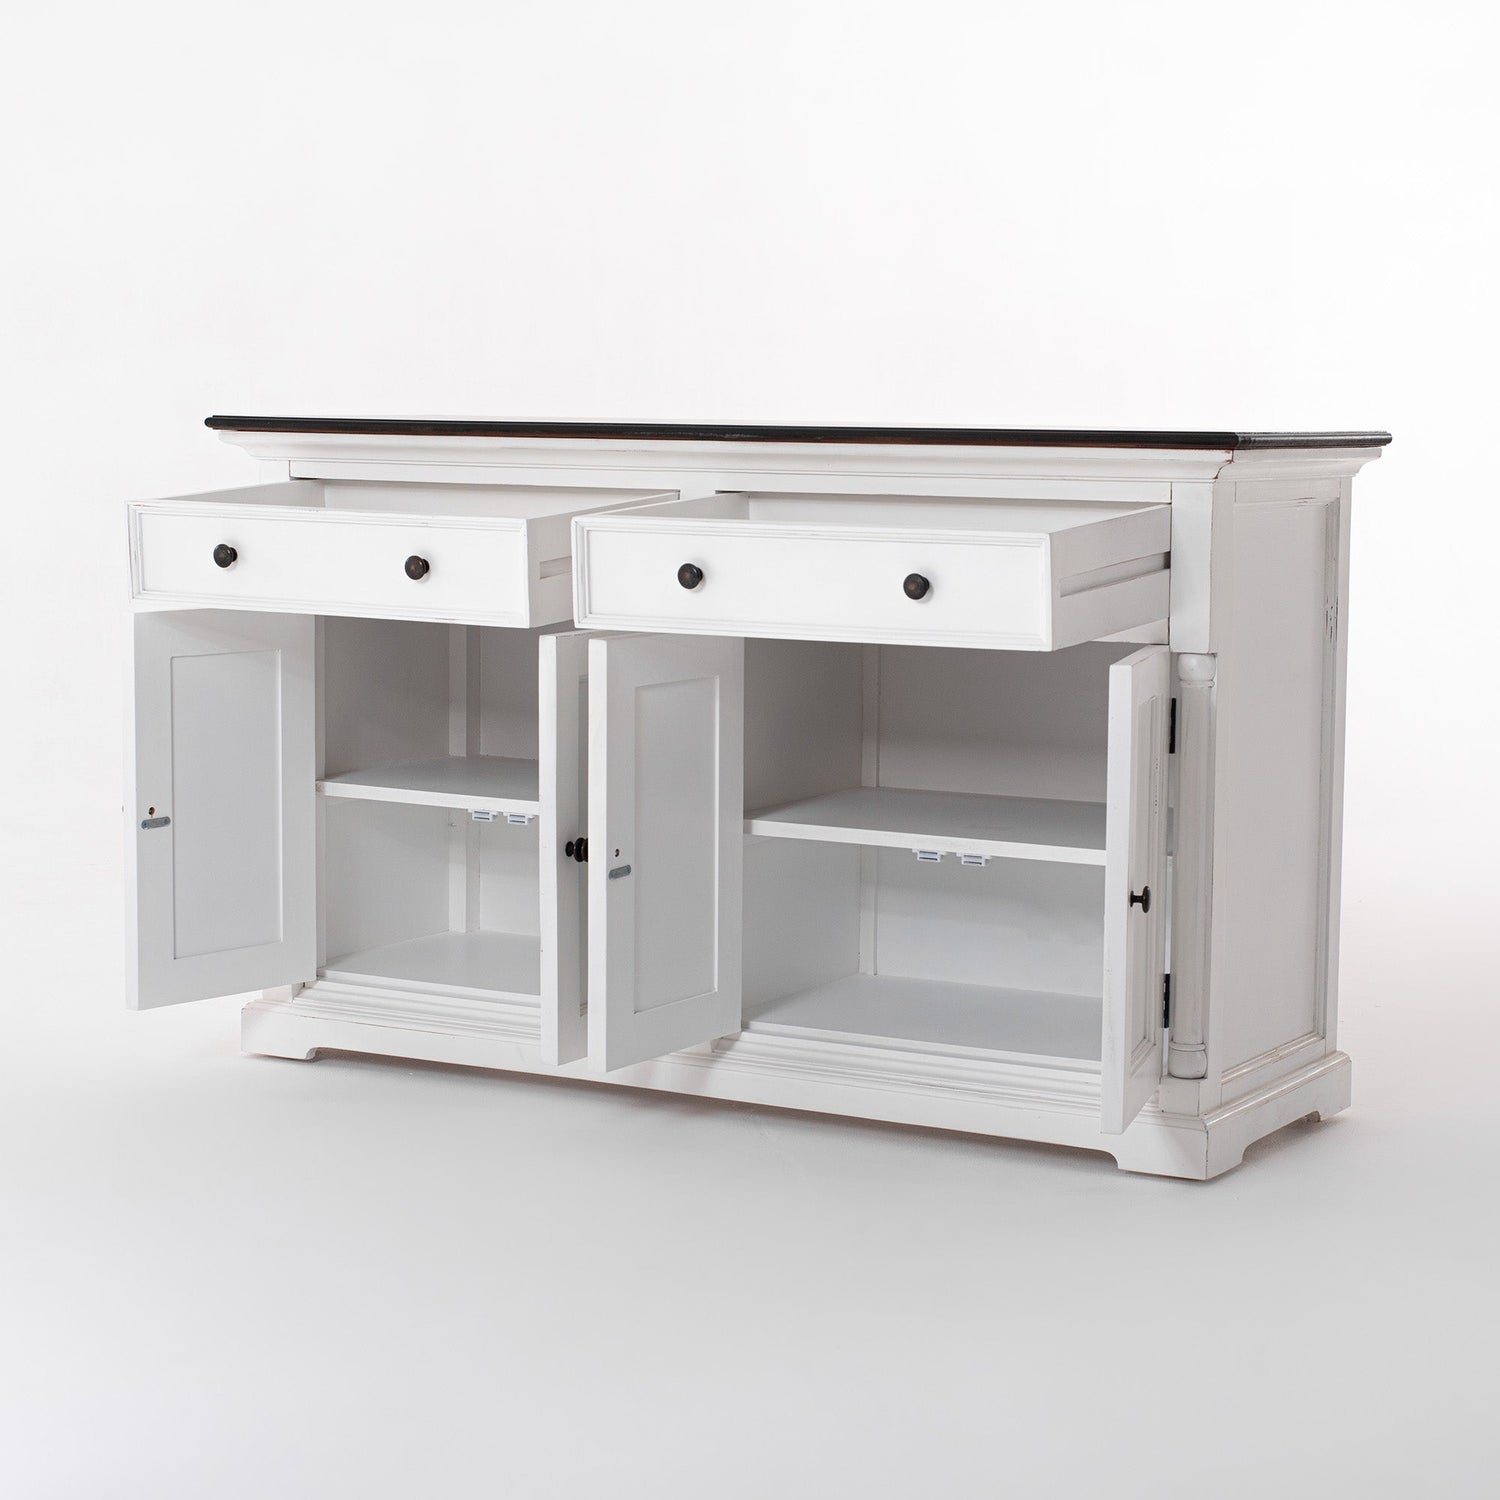 Provence accent sideboard with 2 drawers